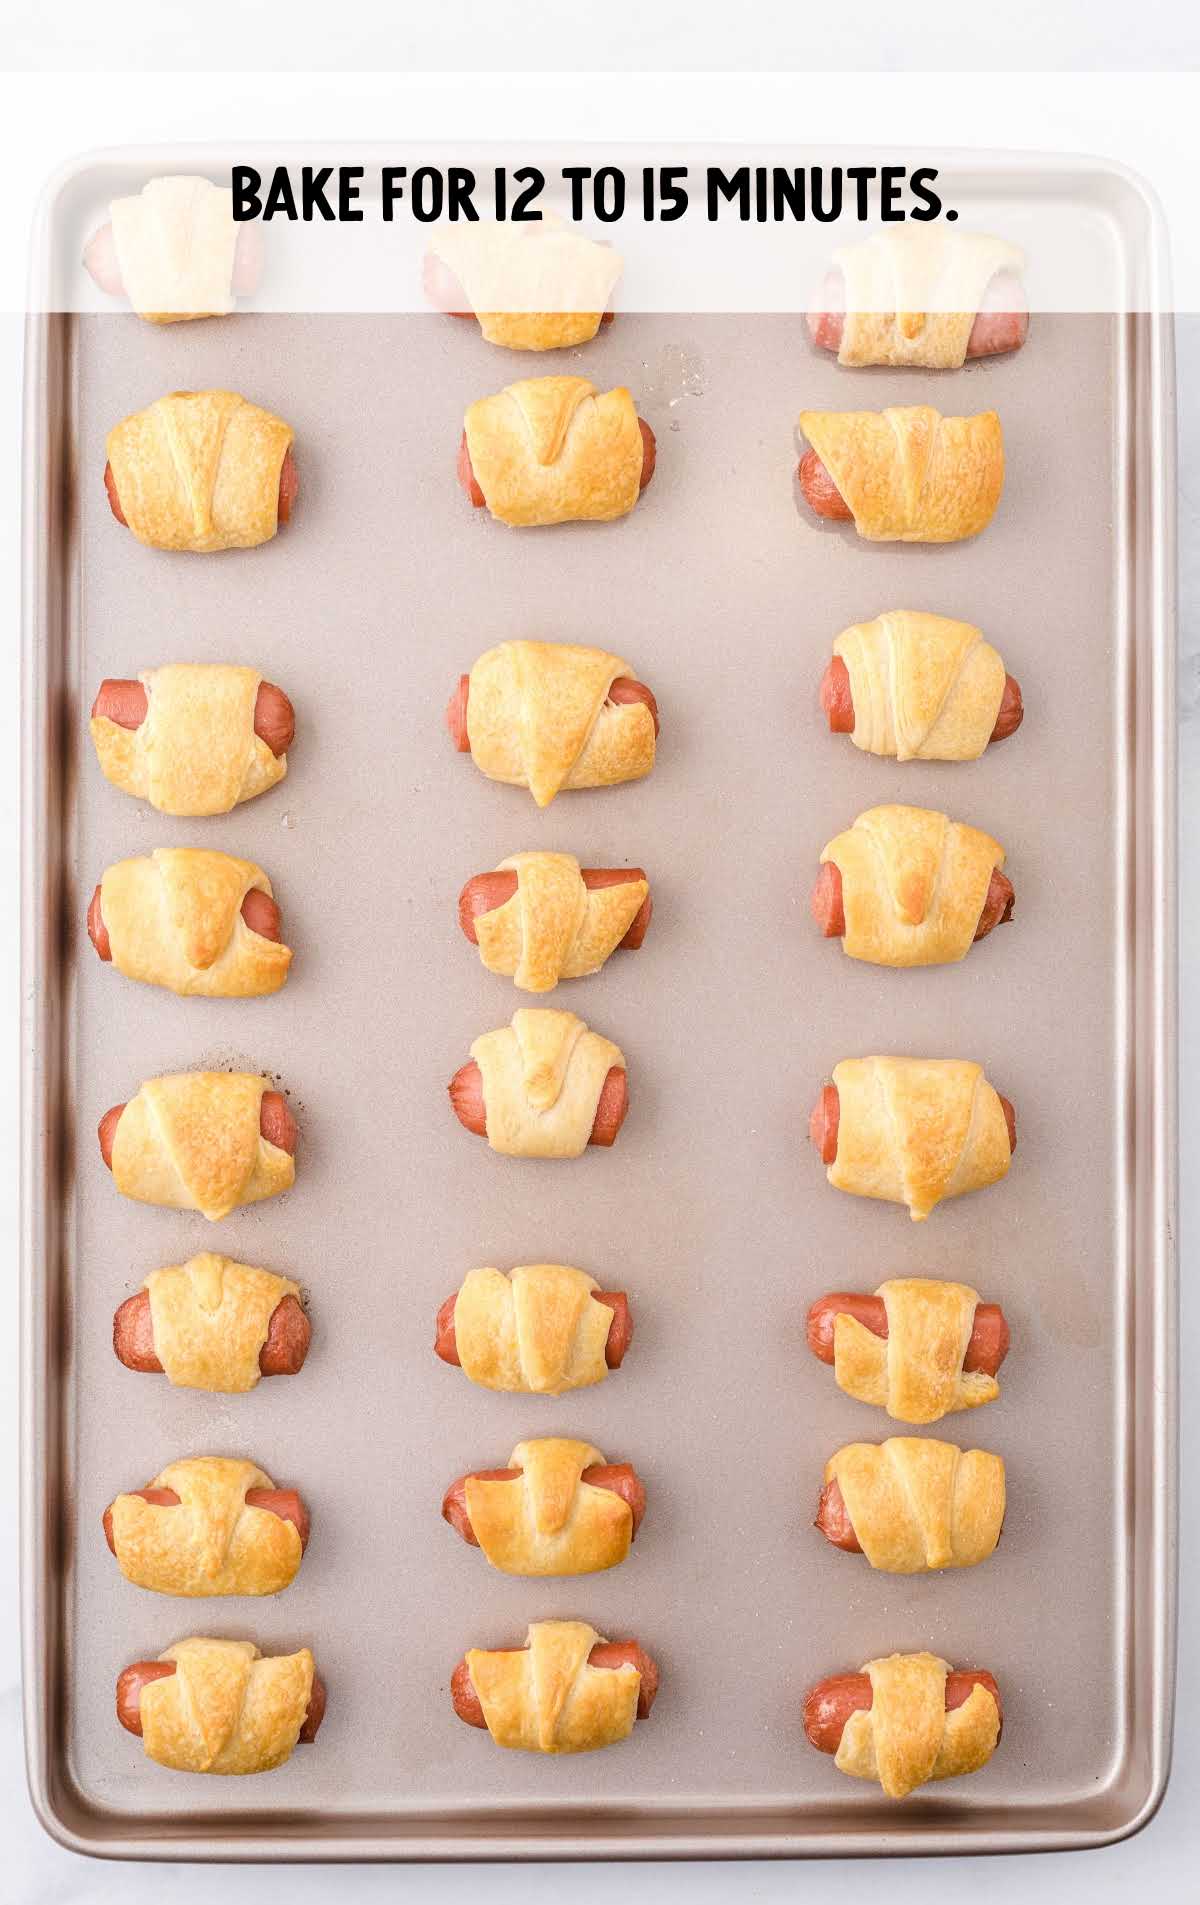 Pigs in a Blanket baked for 12-15 minutes